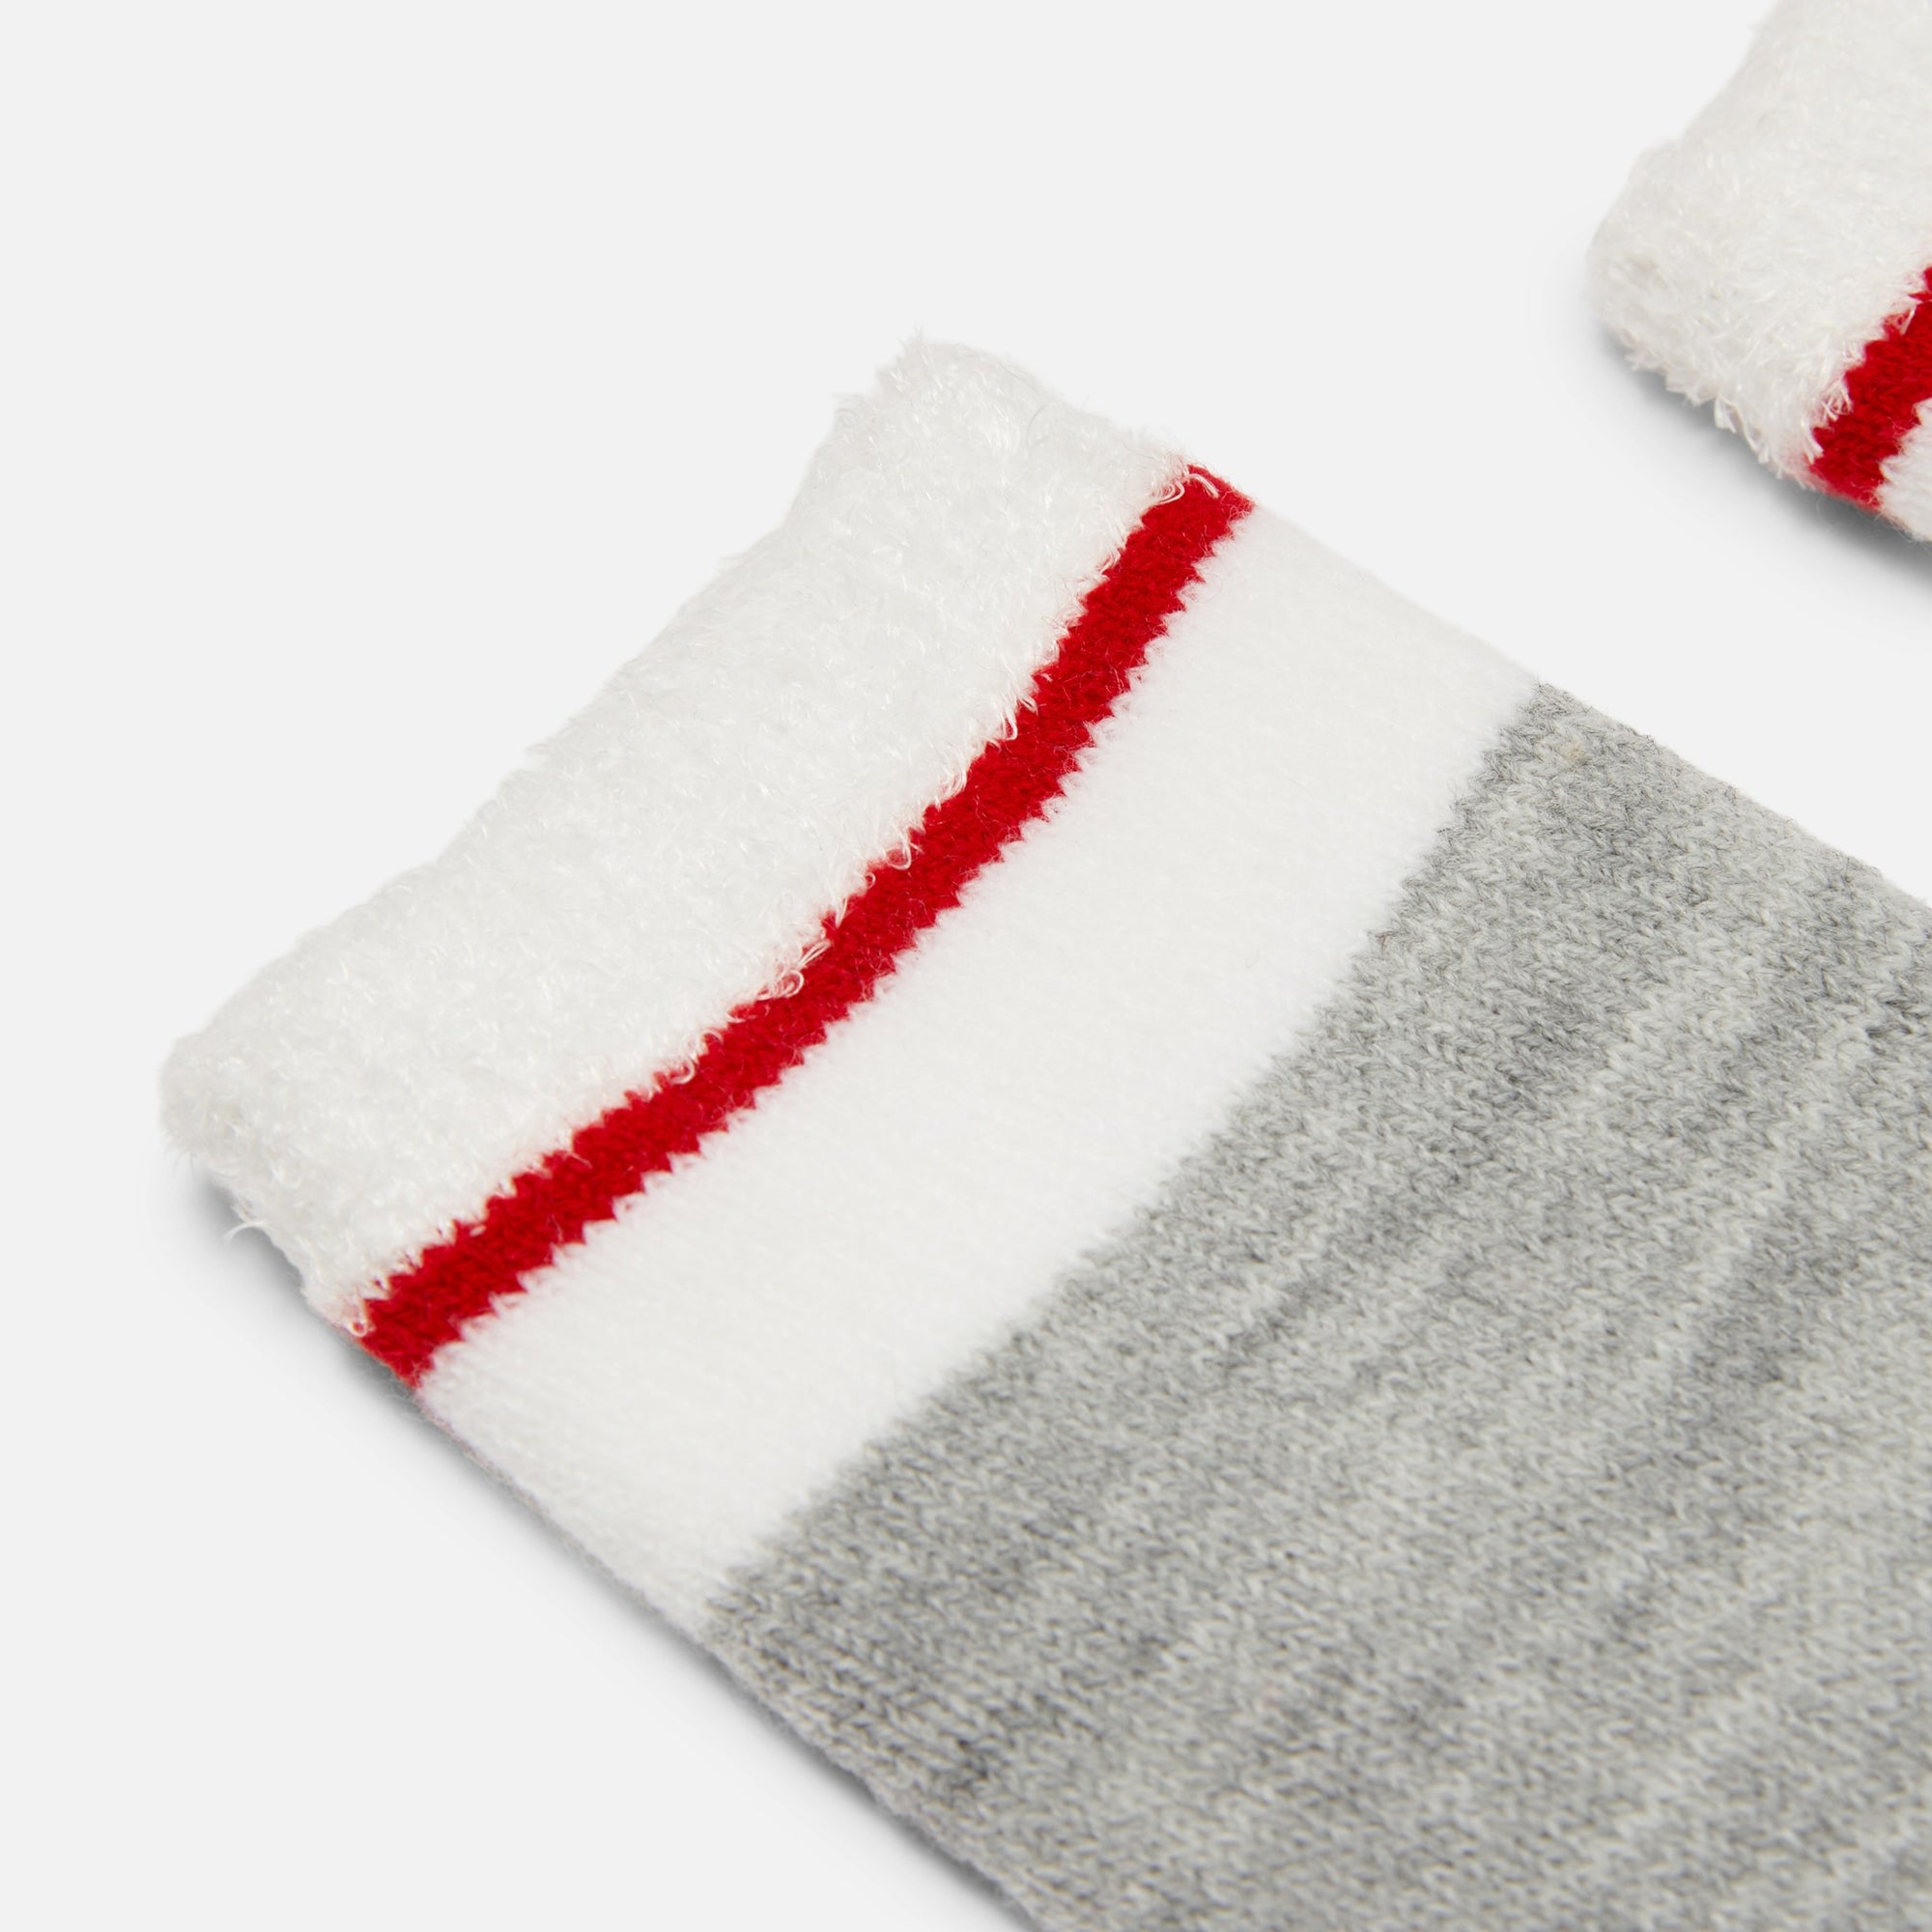 Grey and red socks with inscription